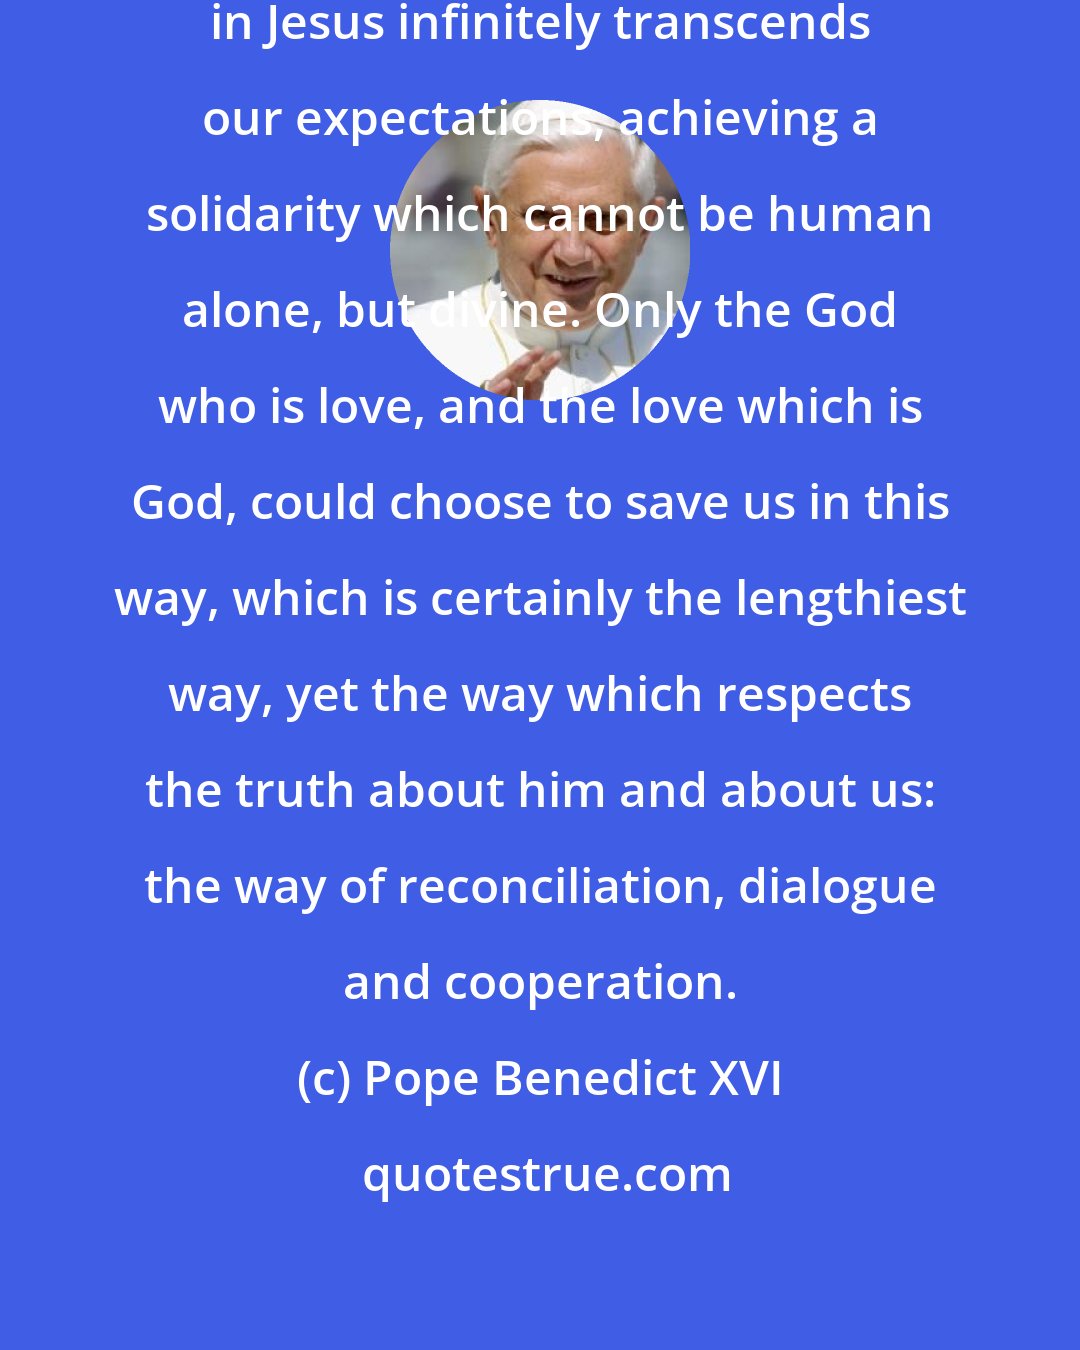 Pope Benedict XVI: The answer to our cry which God gave in Jesus infinitely transcends our expectations, achieving a solidarity which cannot be human alone, but divine. Only the God who is love, and the love which is God, could choose to save us in this way, which is certainly the lengthiest way, yet the way which respects the truth about him and about us: the way of reconciliation, dialogue and cooperation.